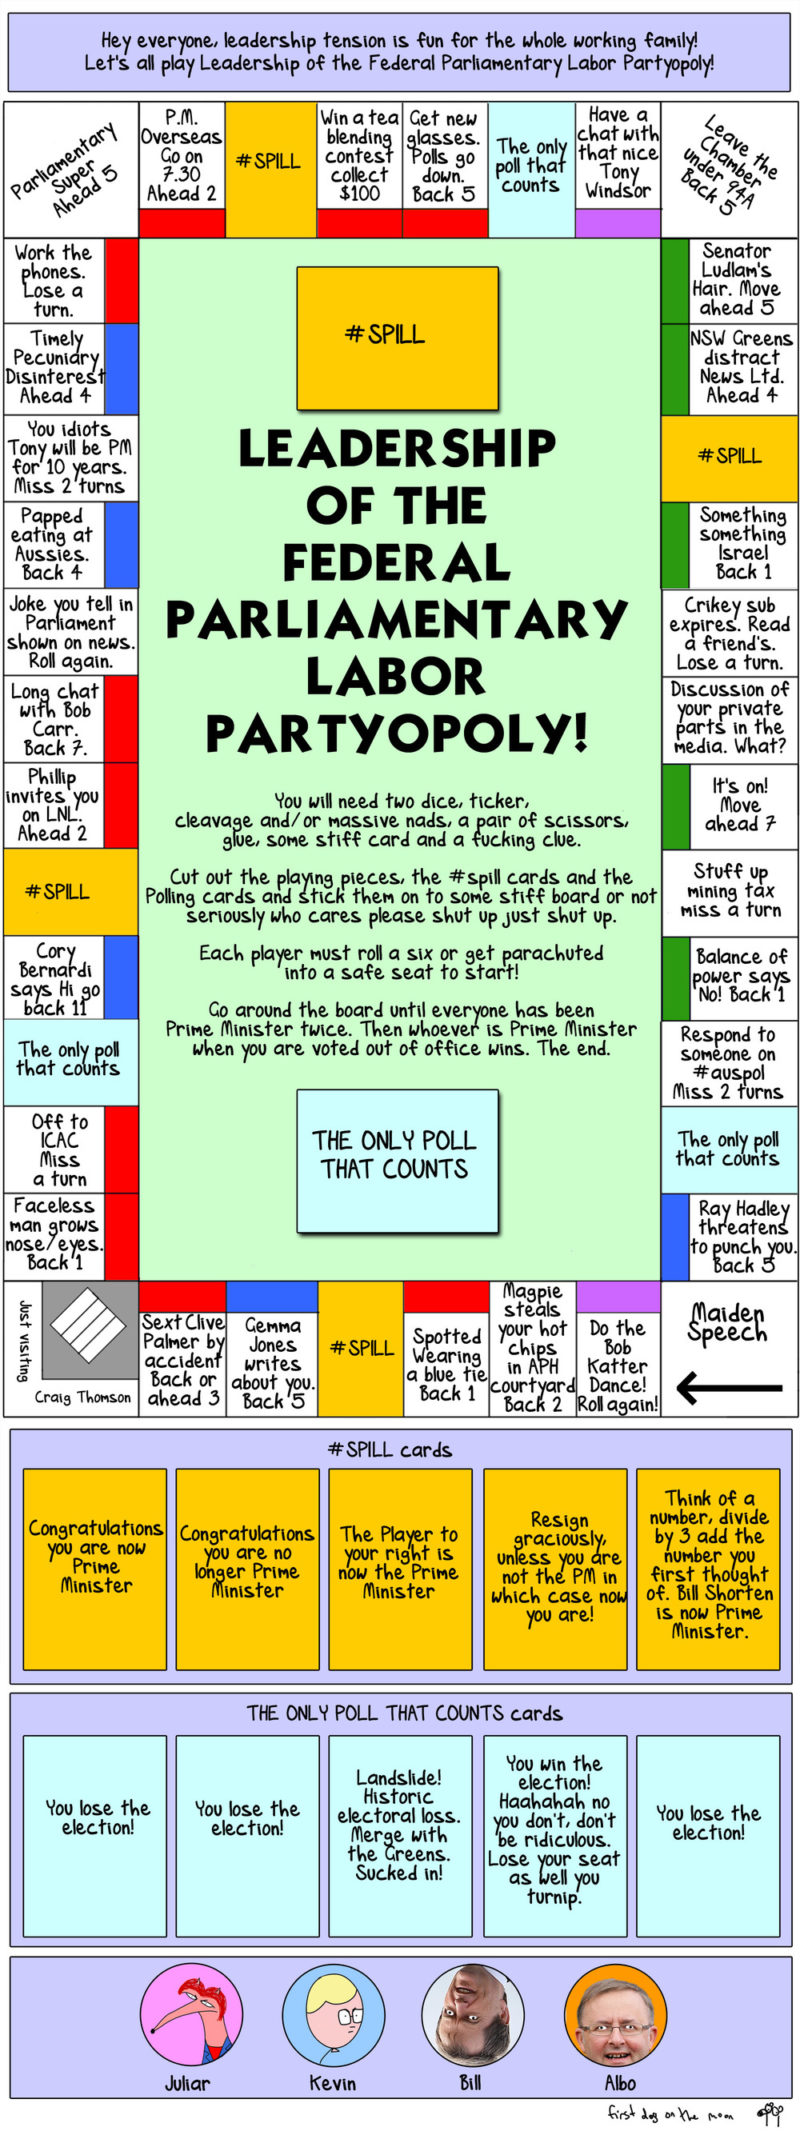 Hey kids, let’s play Leadership Speculationopoly!